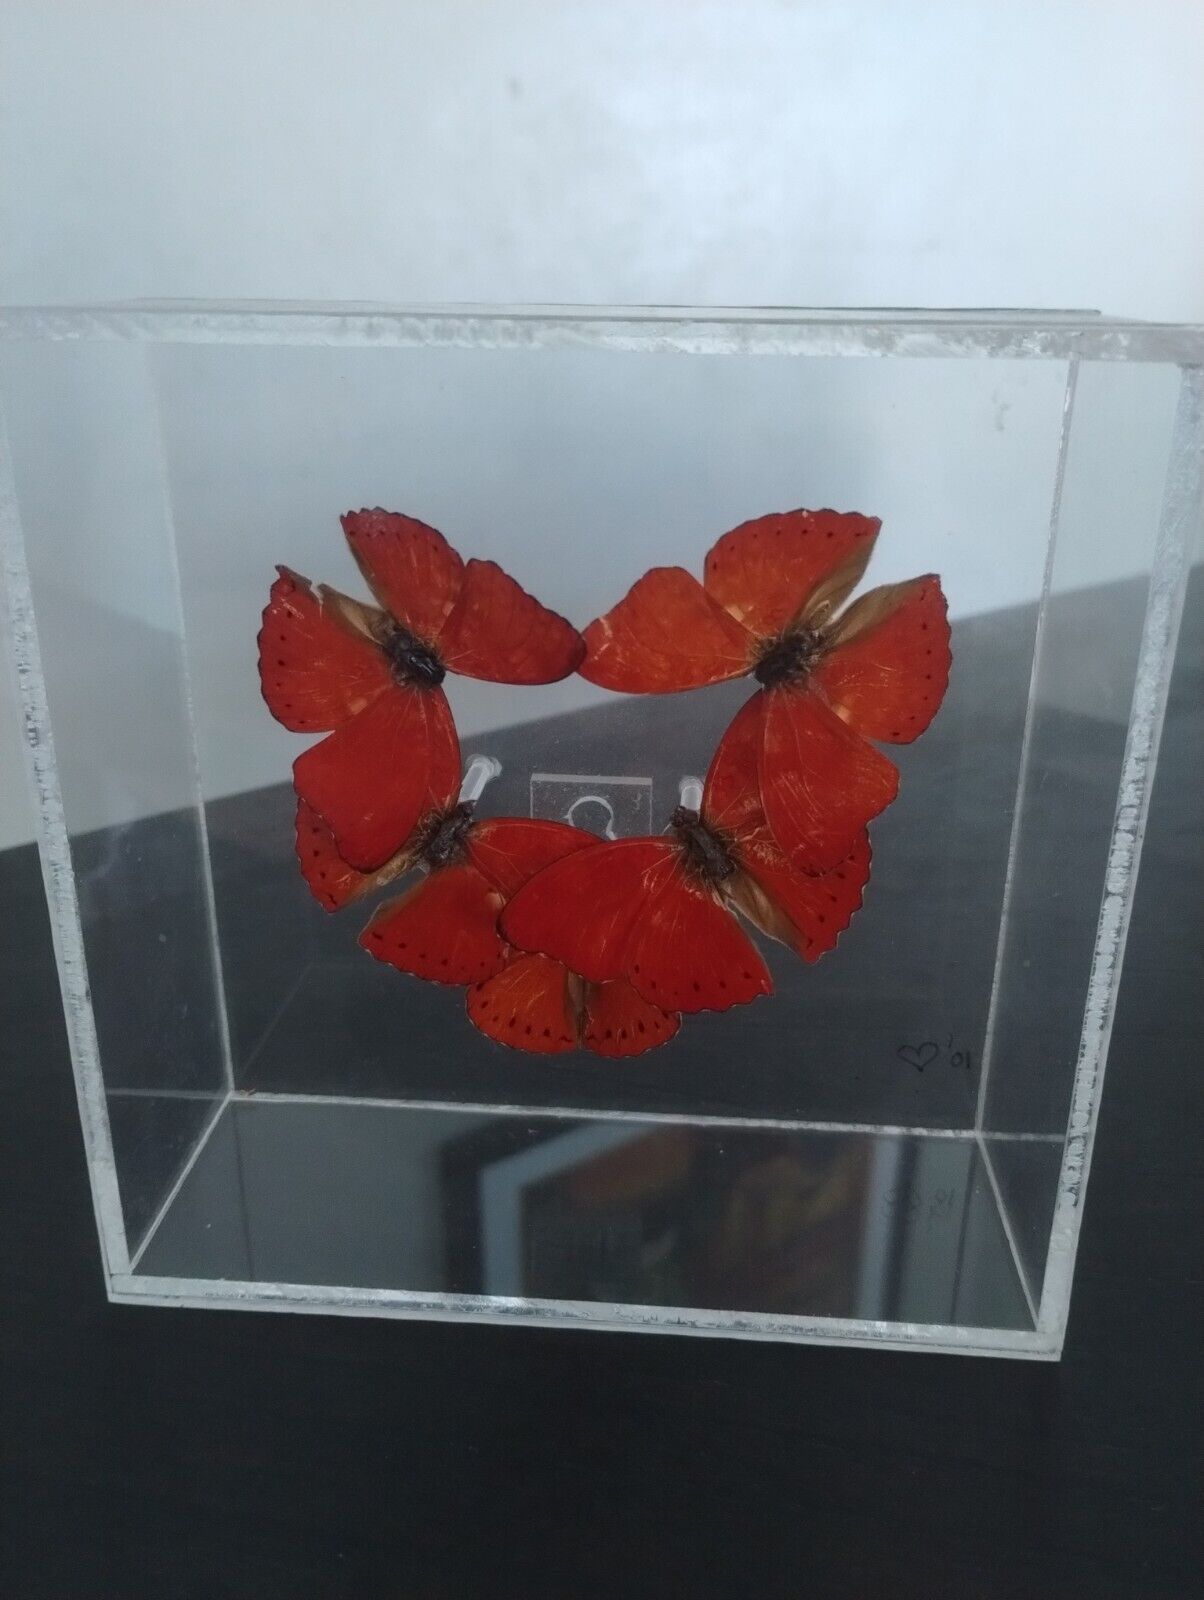 Beautiful Exotic Red Glider Taxidermy Butterflies In Acrylic Case Dated 2001